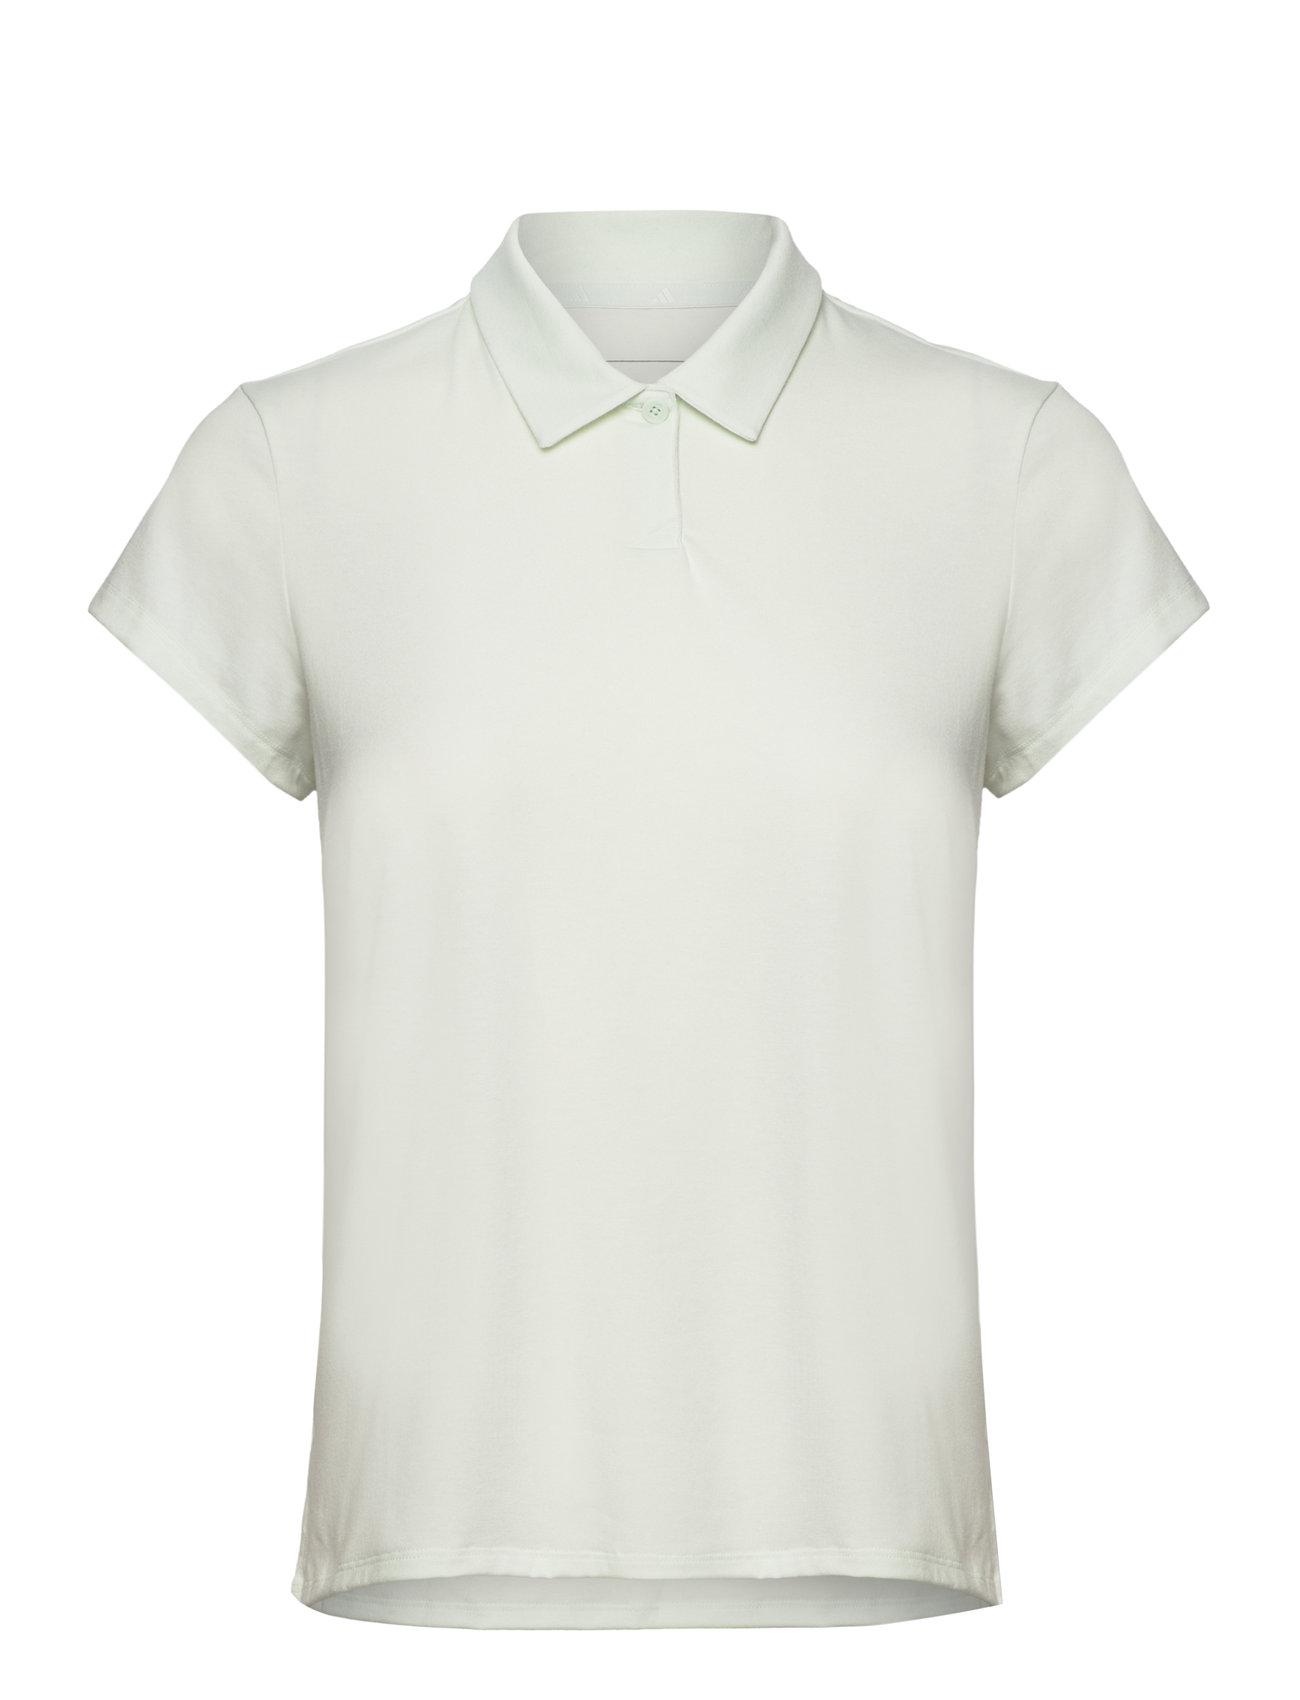 W Go-To Ss P Sport T-shirts & Tops Polos Green Adidas Golf